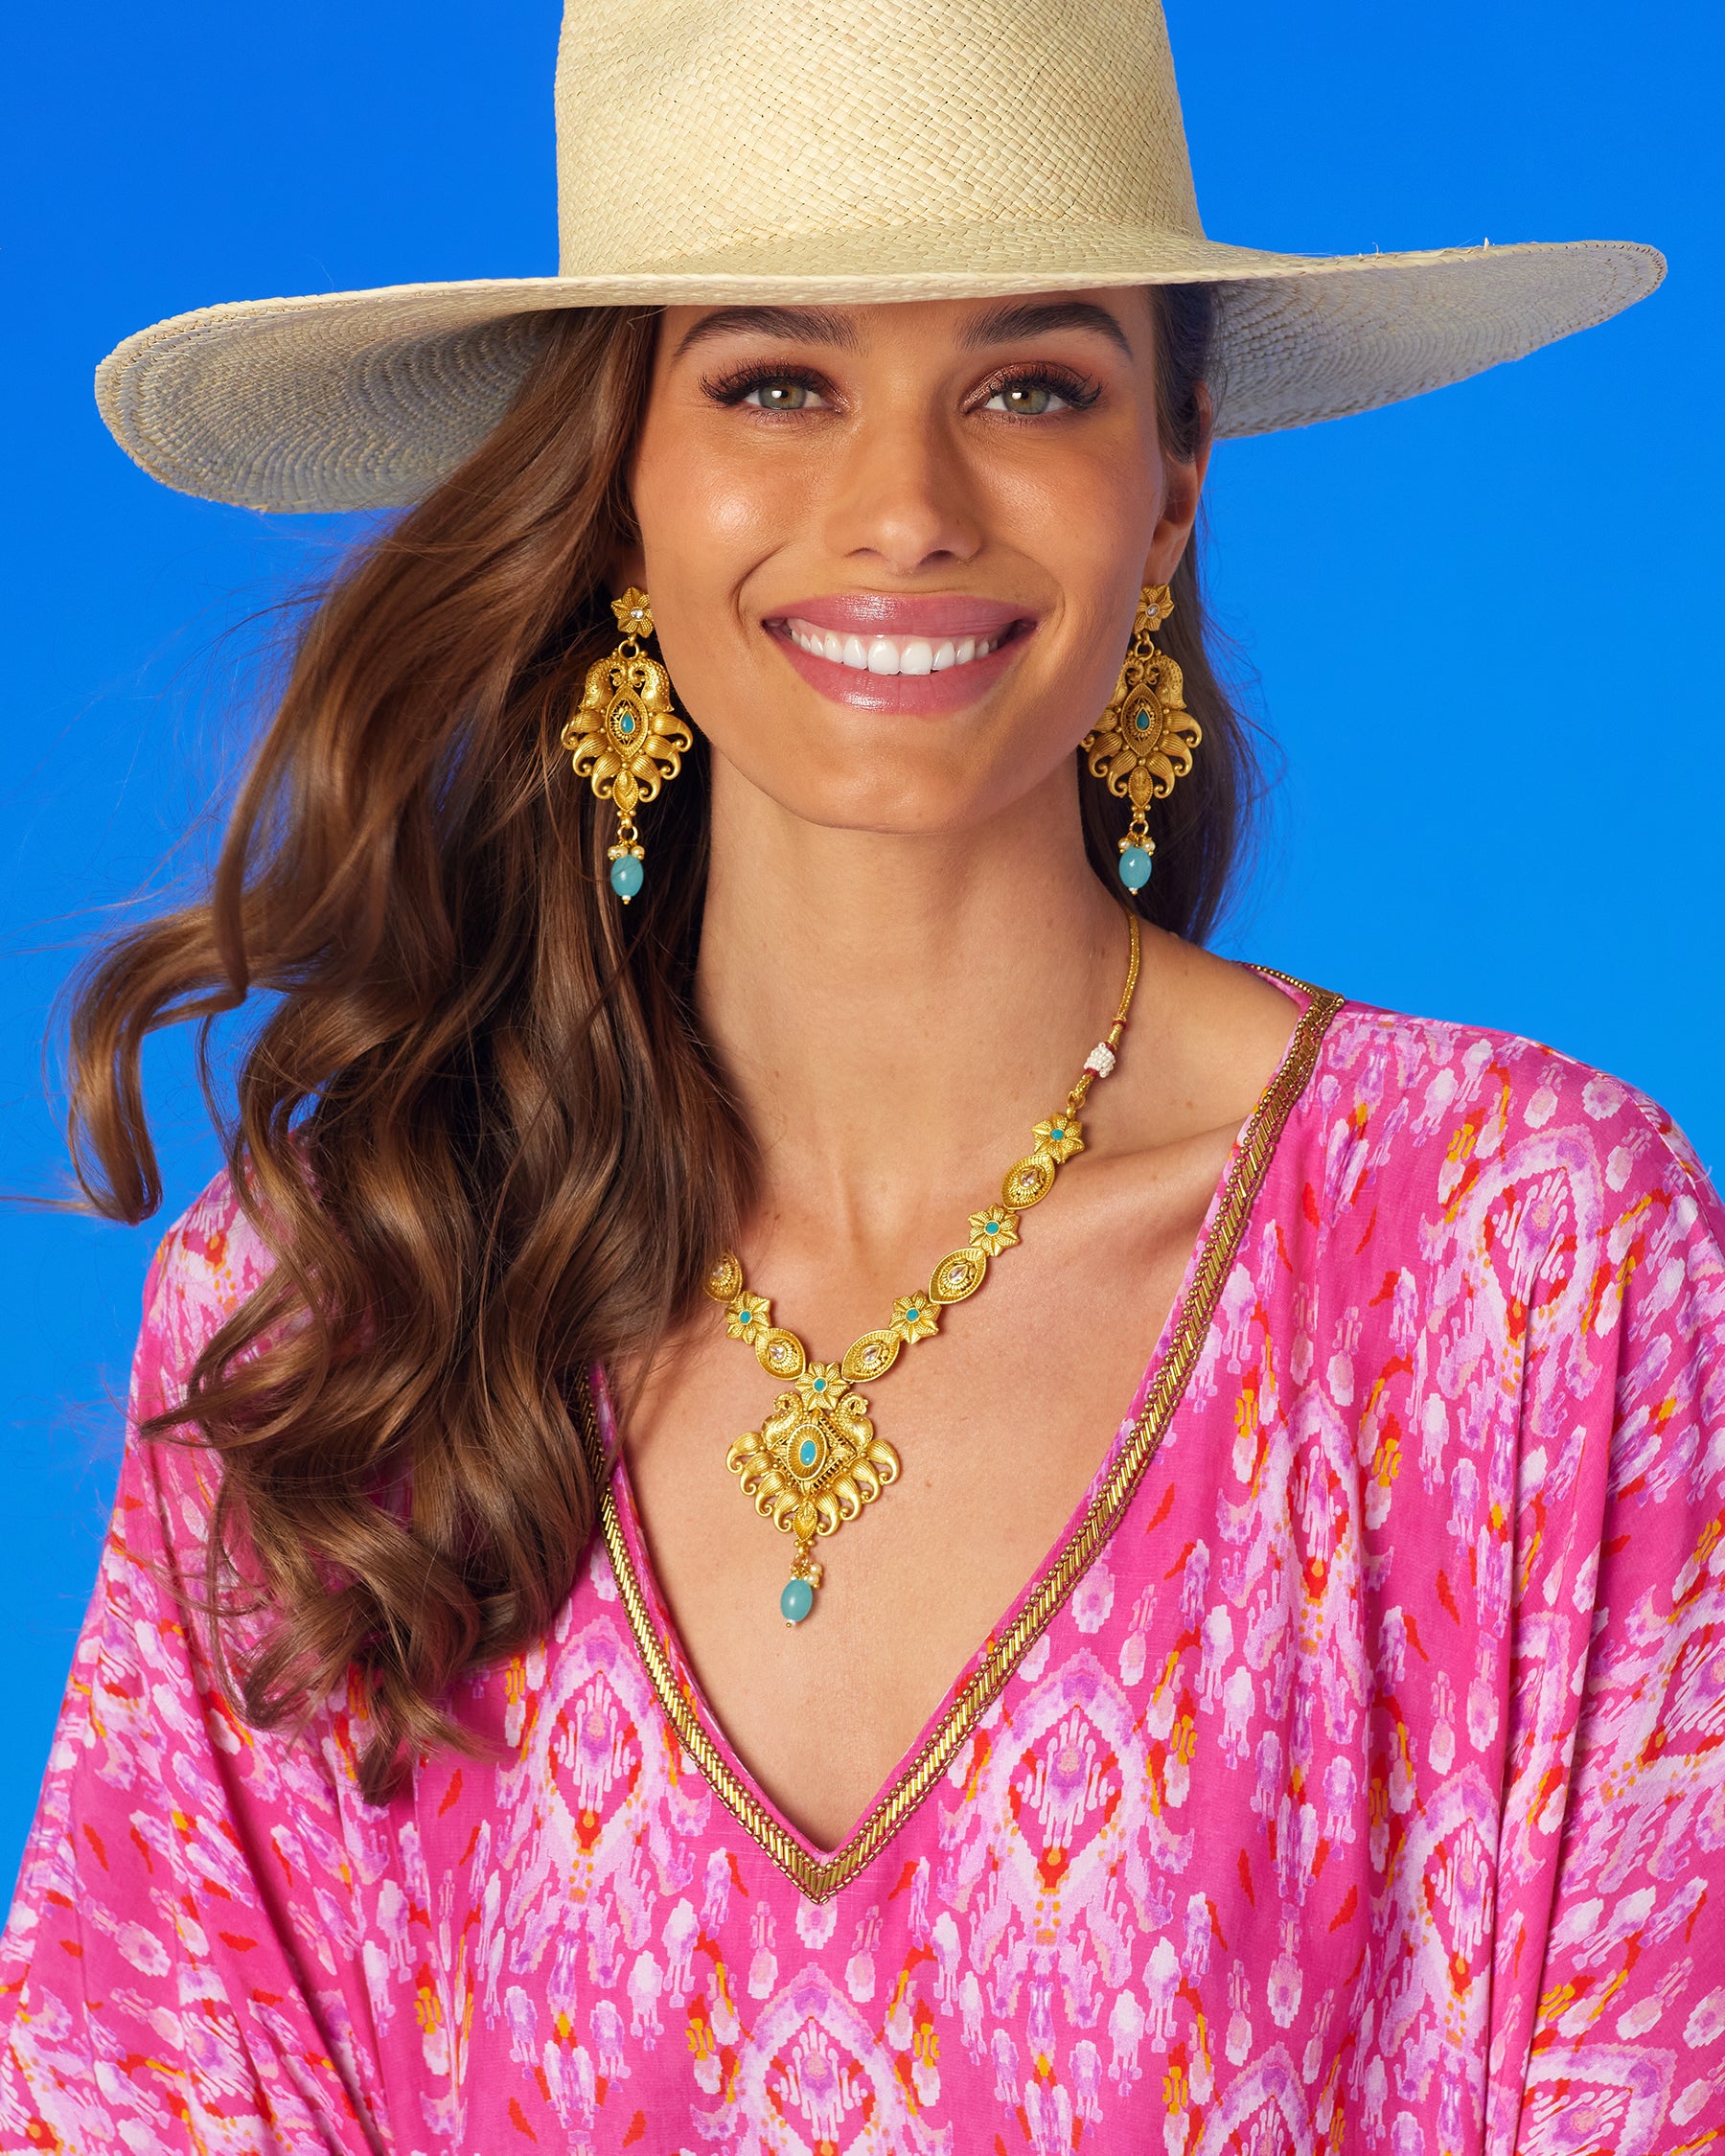 Aria Necklace in Gold Plated Filigree and Aquamarine worn with the Orchidea Kaftan in Fuchsia Pink Ikat and Gold Beaded Trim and straw hat